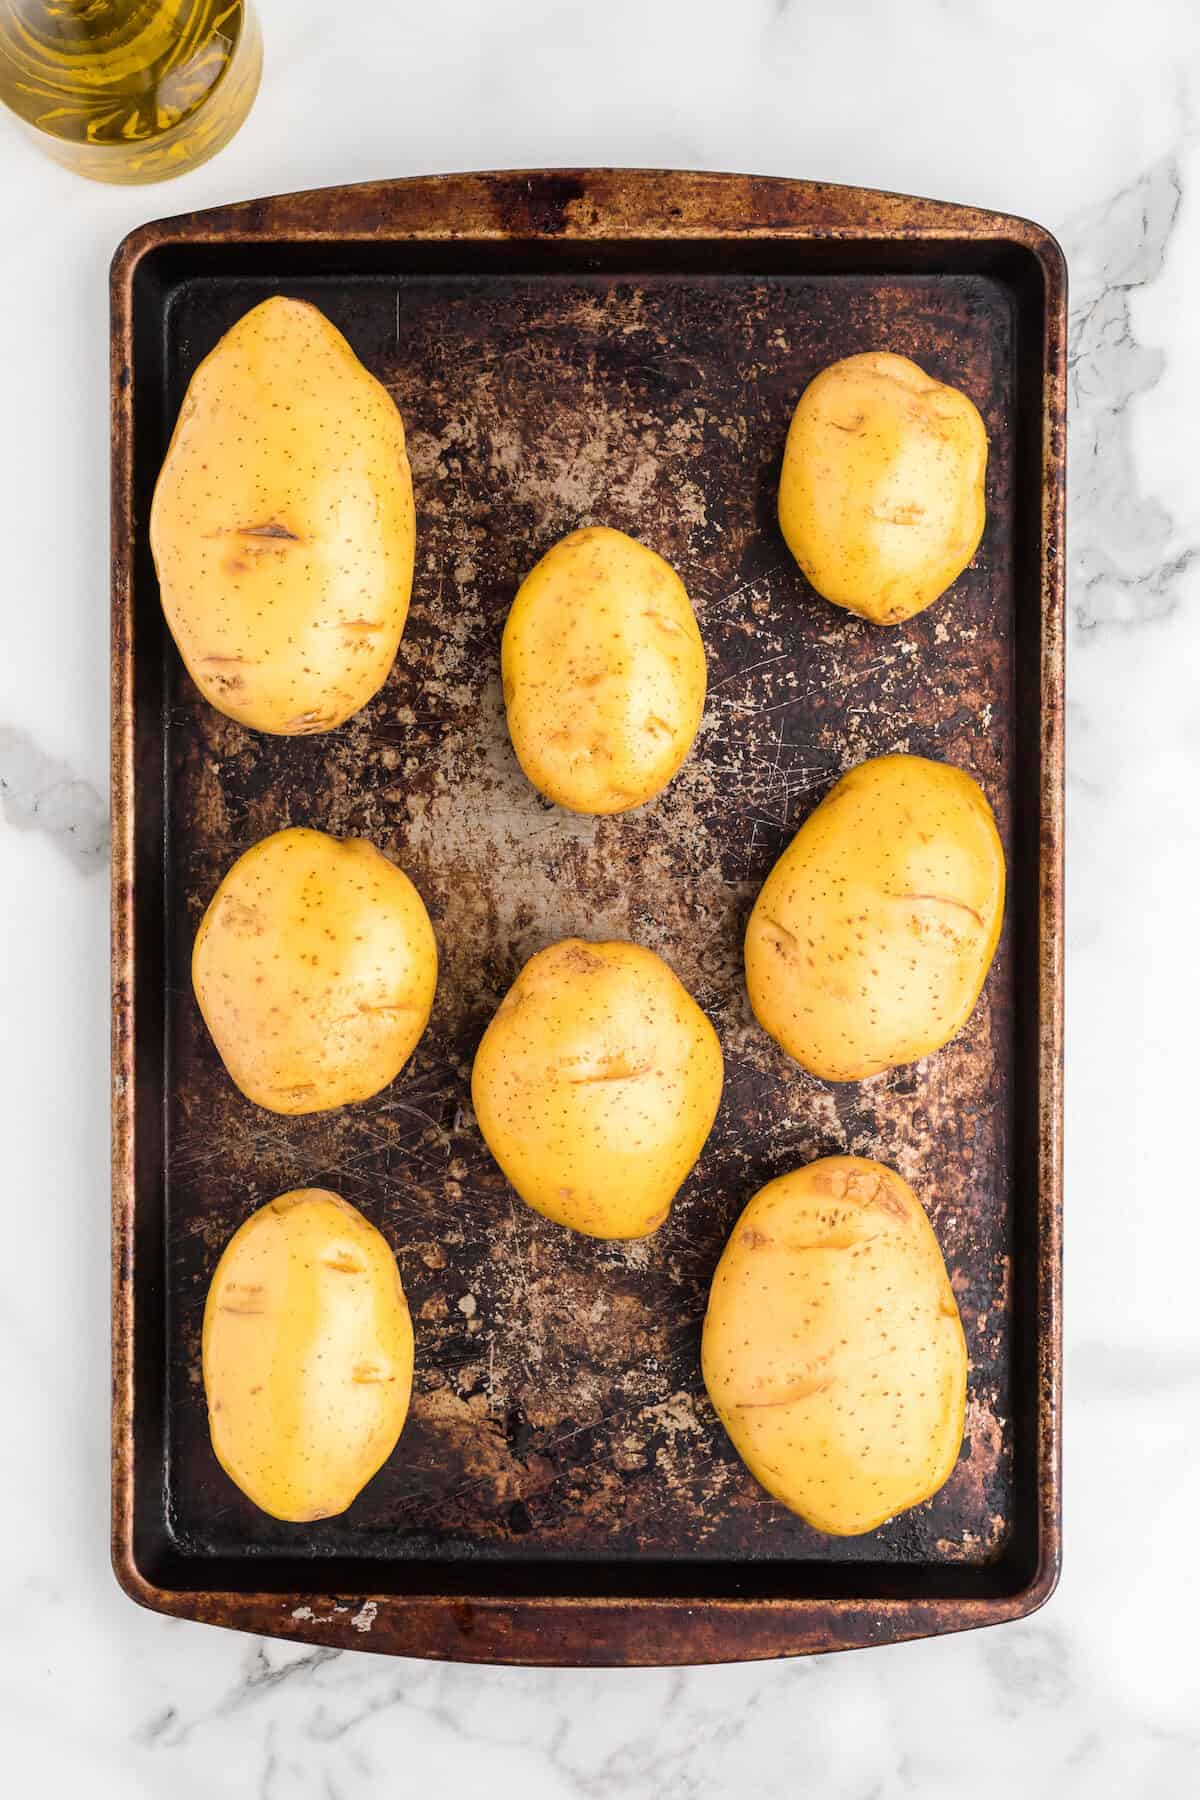 Yukon gold potatoes on a baking sheet with oil rubbed on sides.